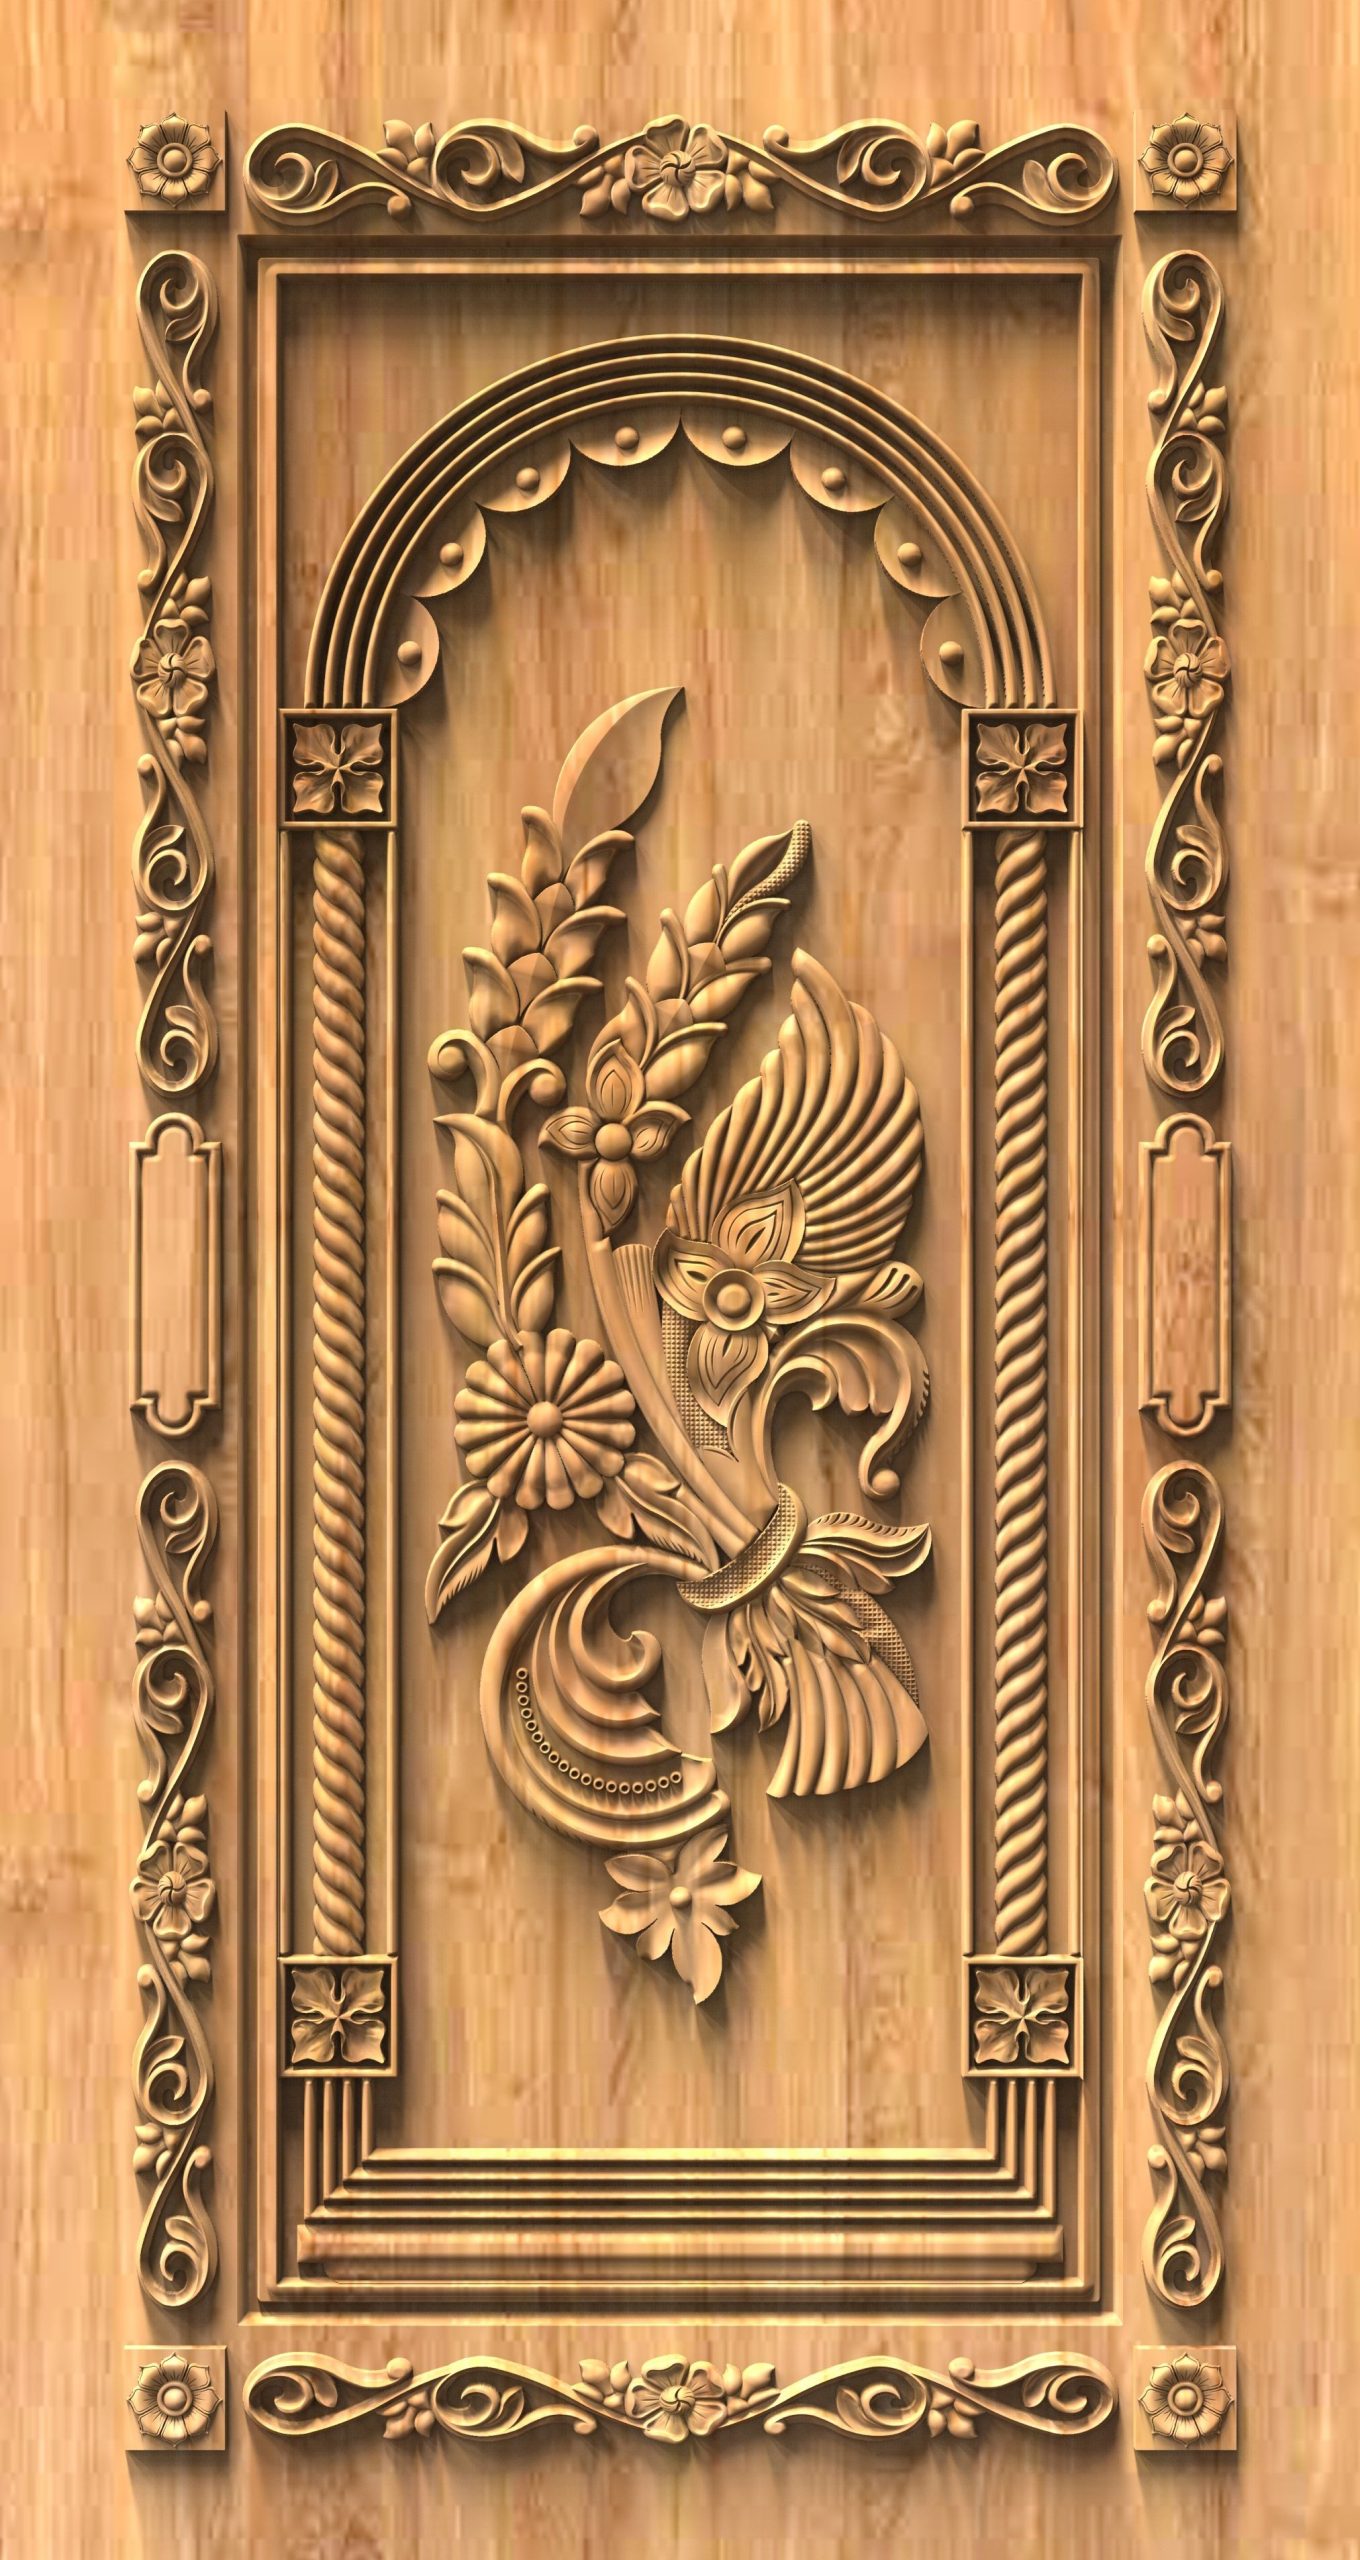 Curved And Carved: Exploring Artistic Designs For Interior Doors